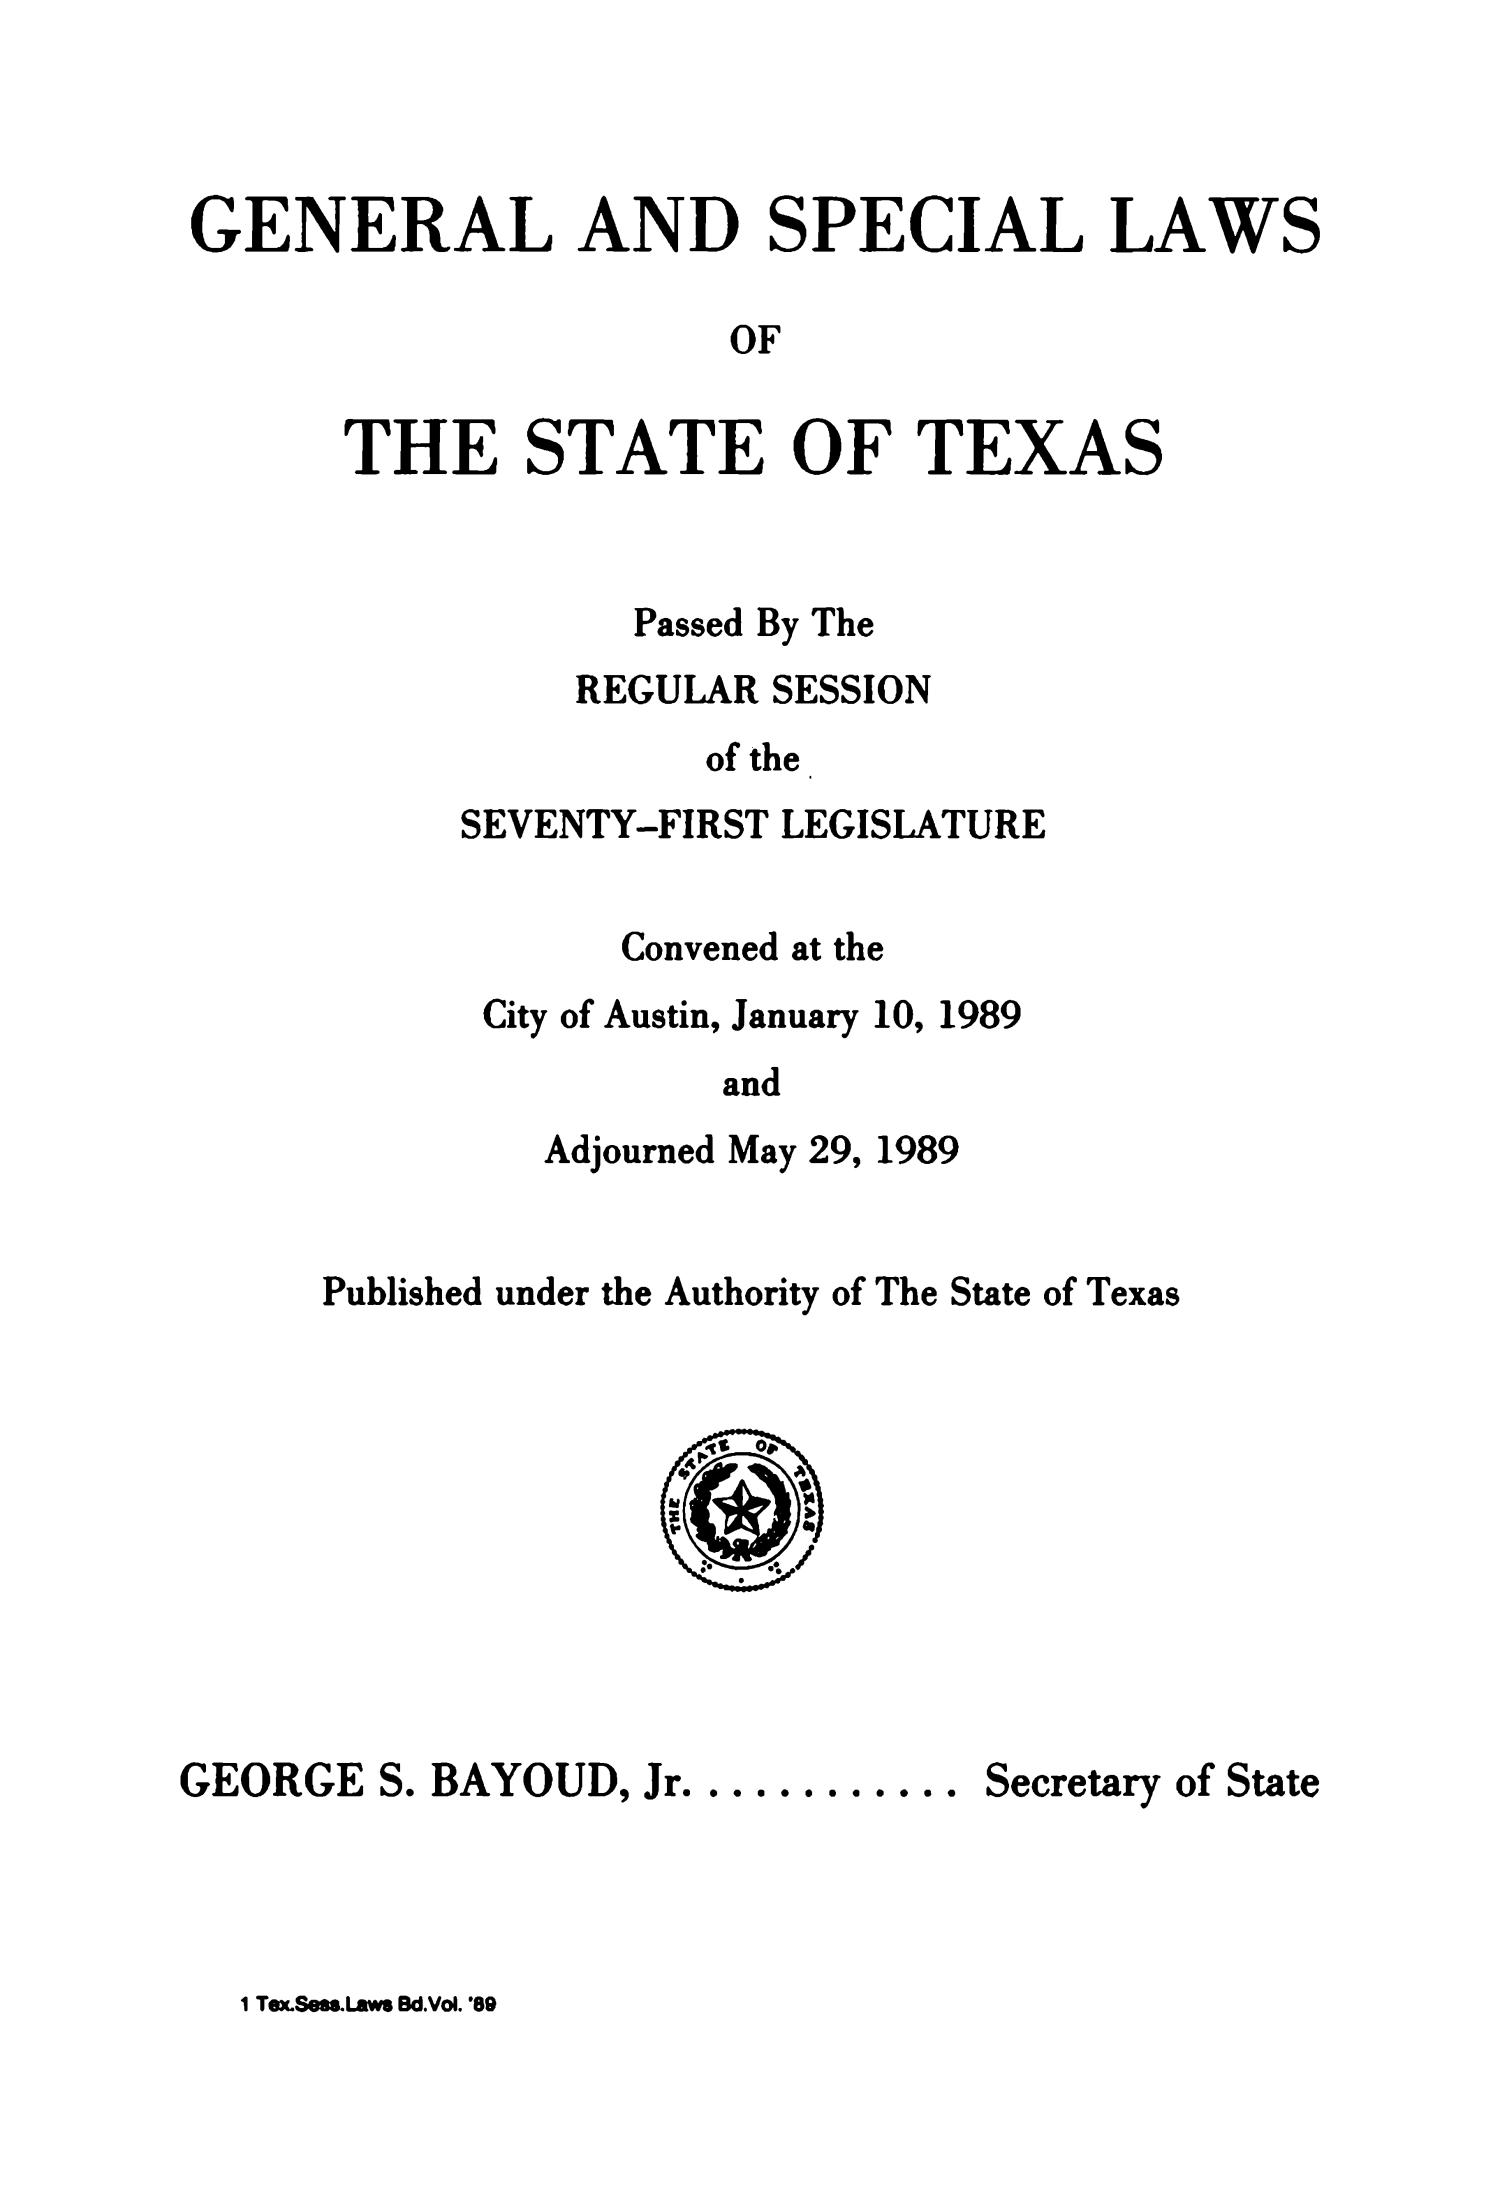 General and Special Laws of The State of Texas Passed By The Regular Session of the Seventy-First Legislature, Volume 1
                                                
                                                    tp
                                                